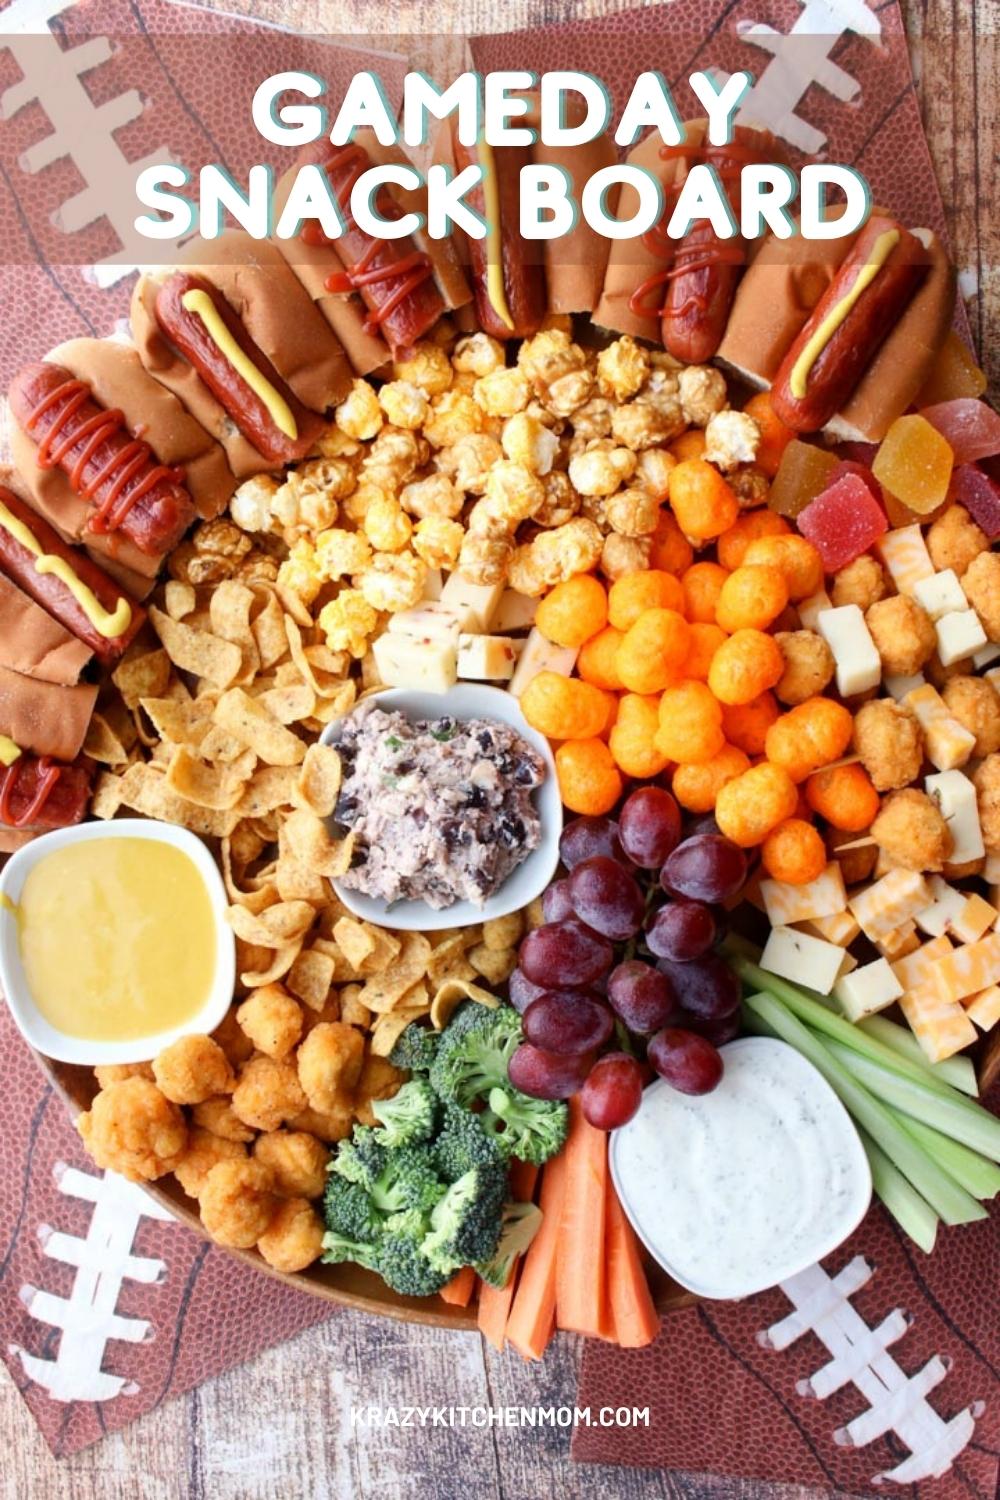 This Game Day Snack Board is a charcuterie board gone casual. It's filled with family-fun snacking finger foods that everyone loves. via @krazykitchenmom